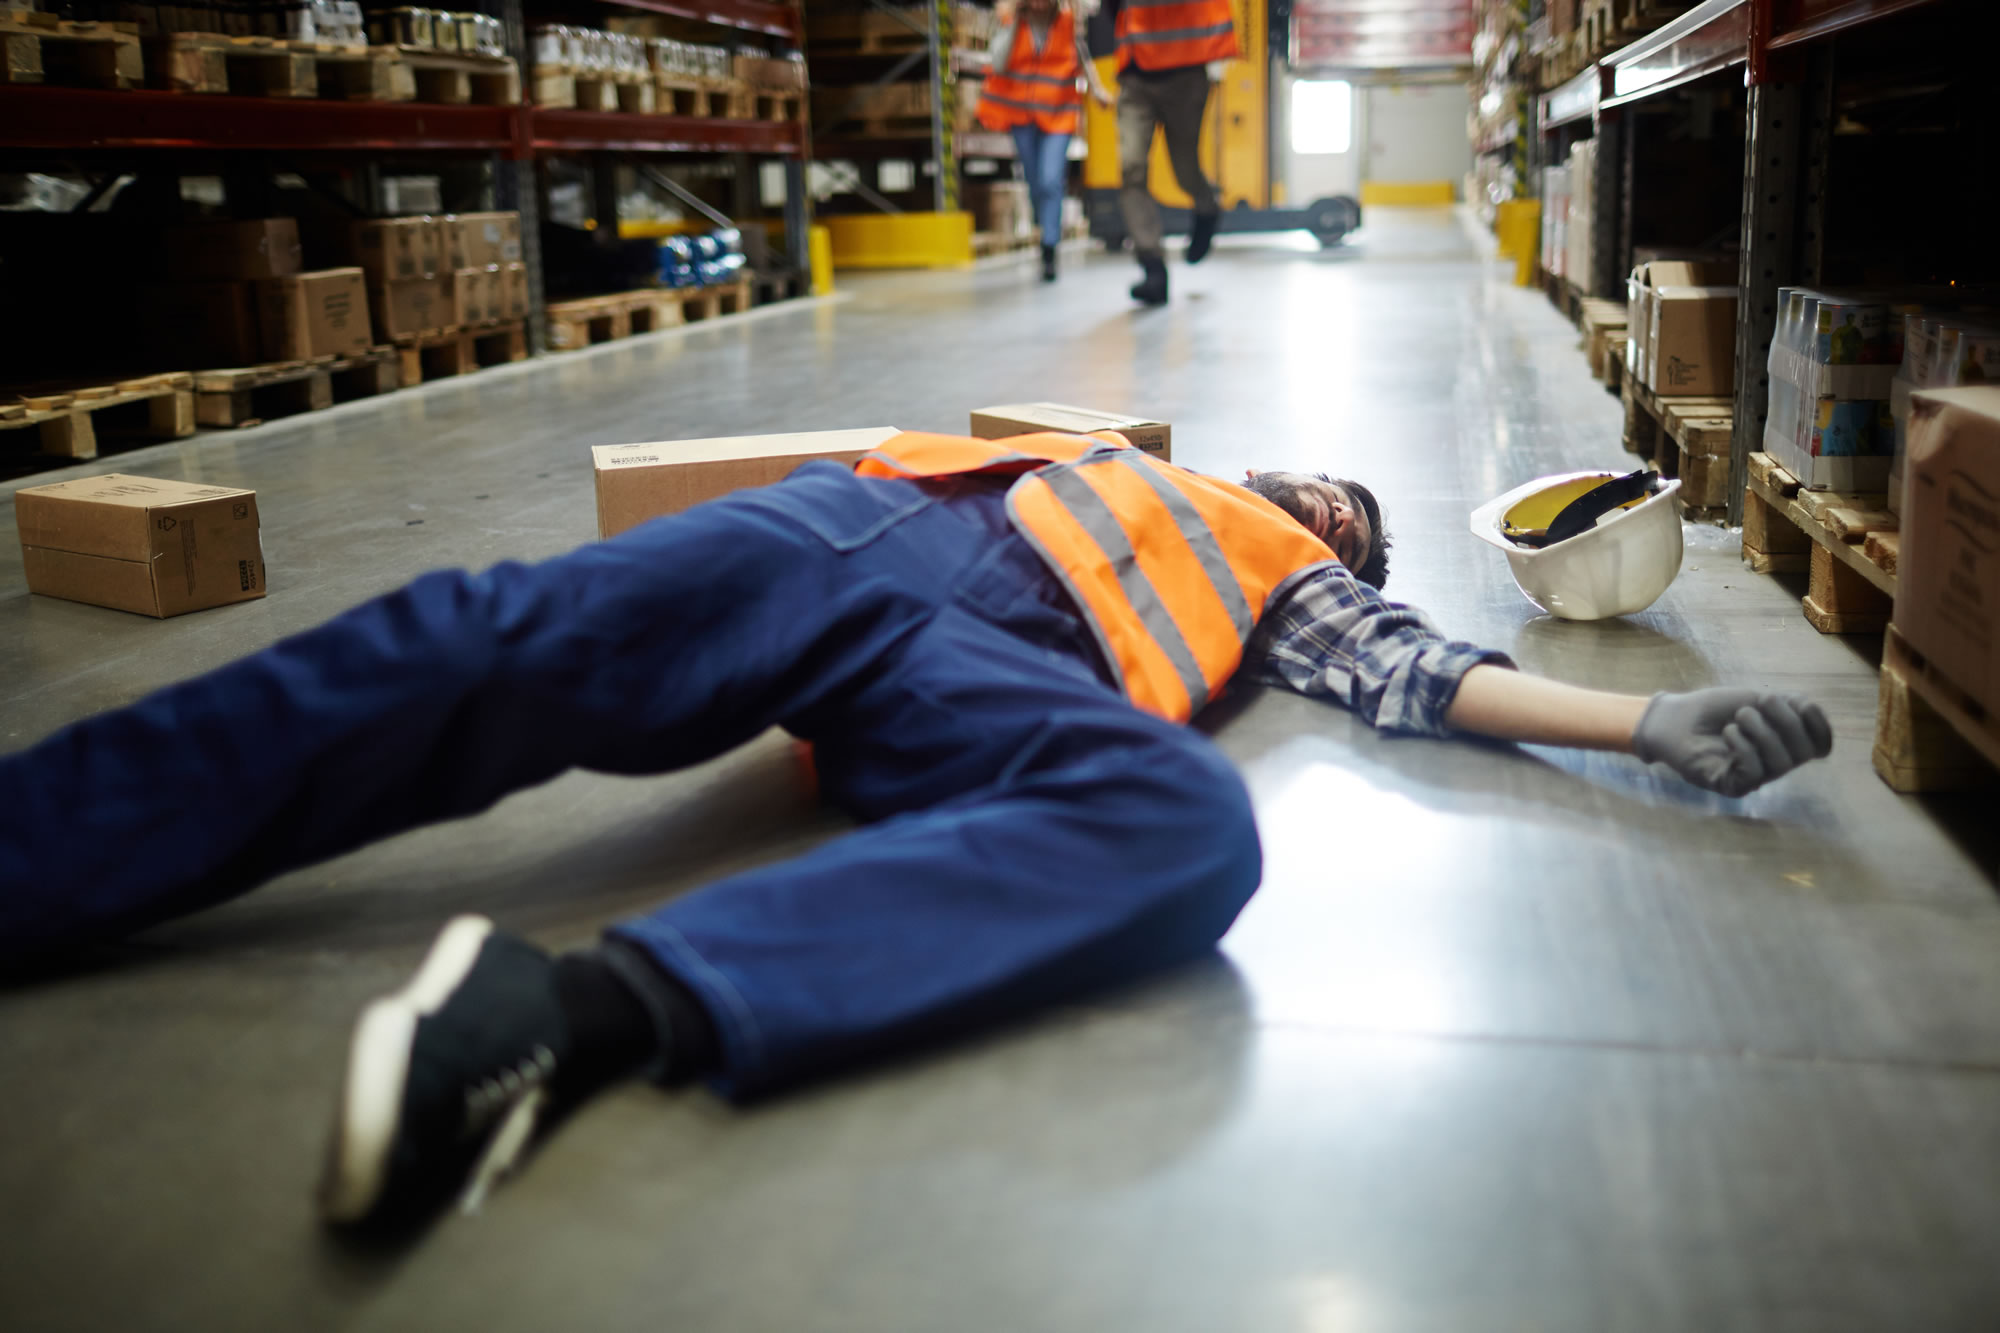 Stockport accident at work - Workplace Slip, Trip or Fall suing employer for negligence